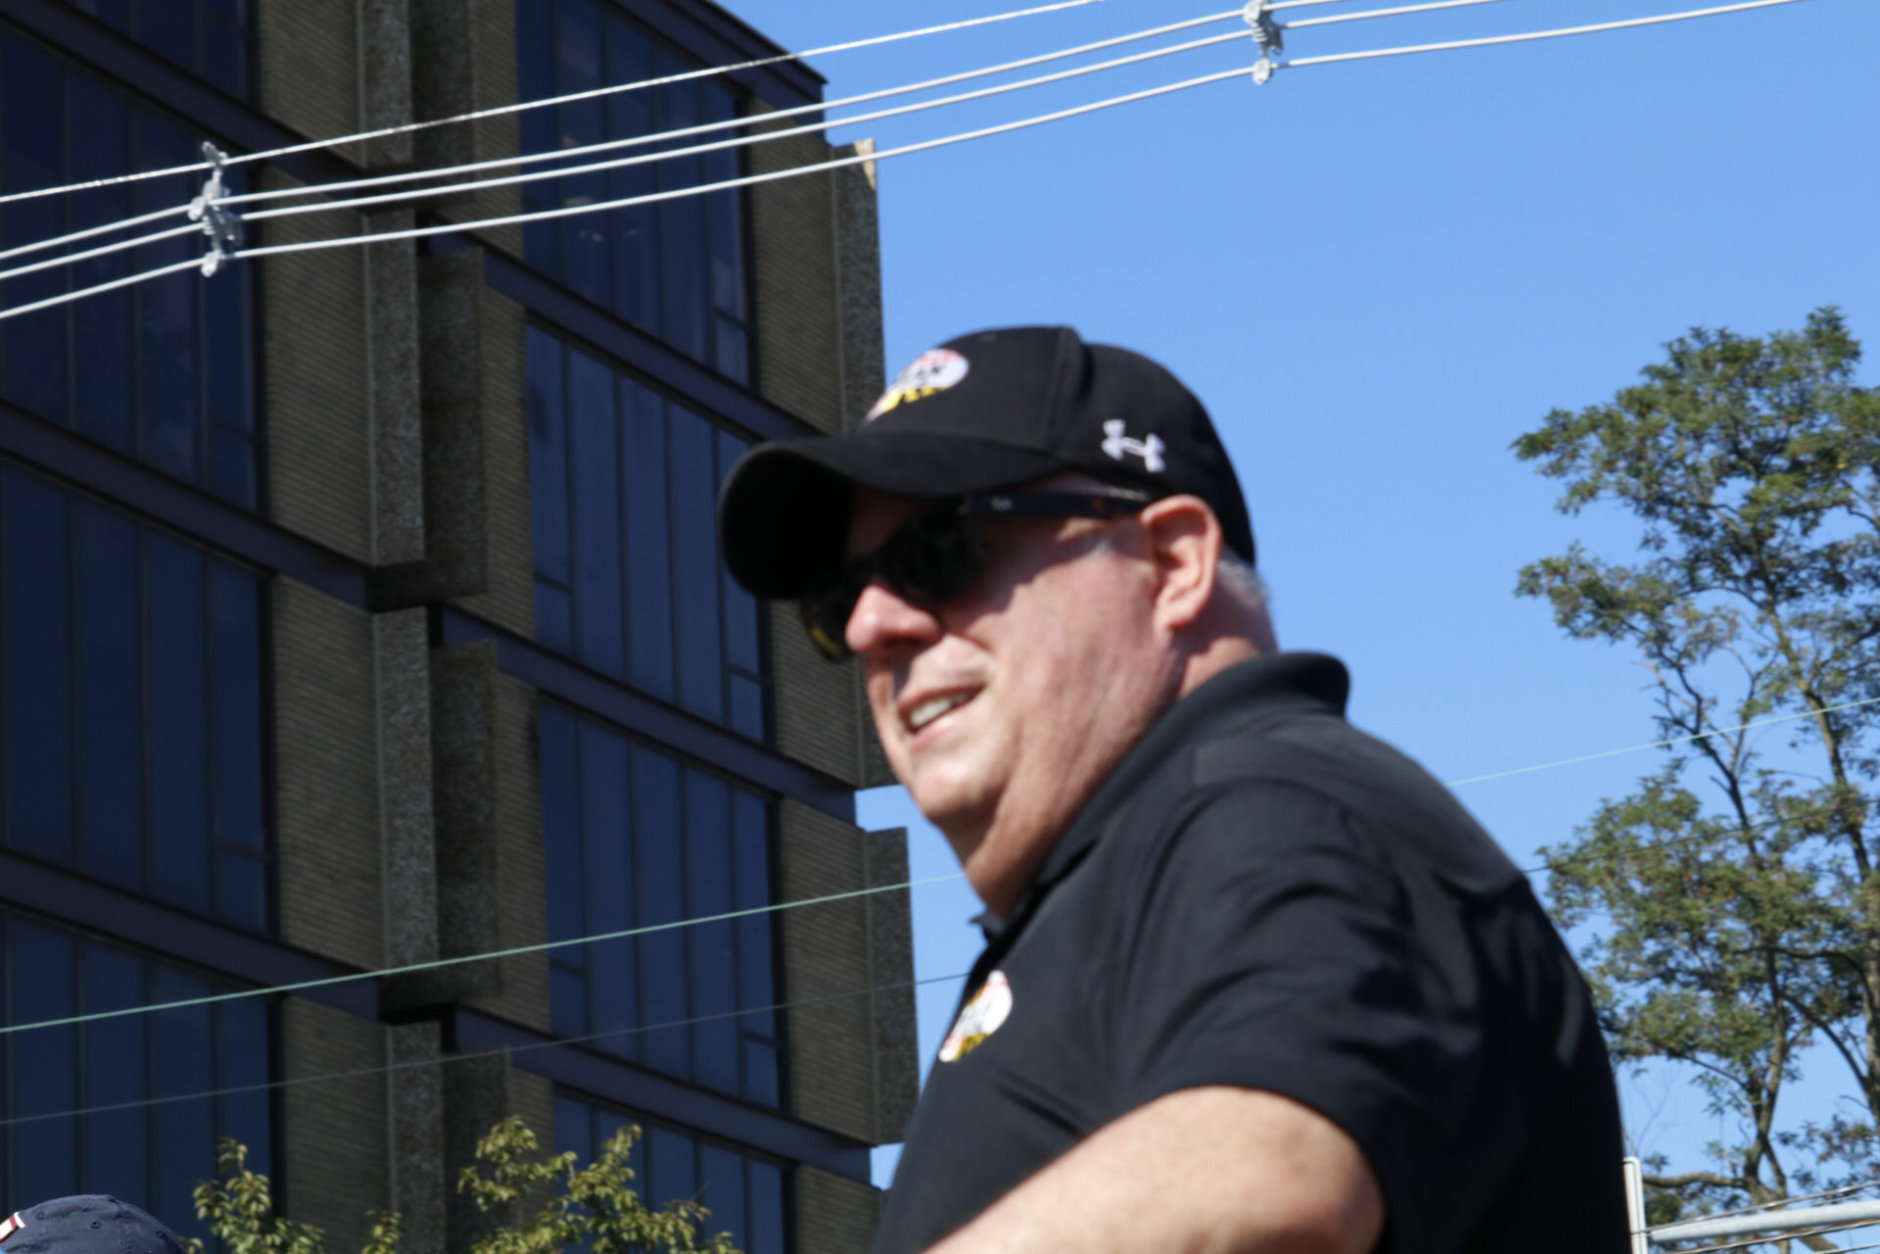 Governor Larry Hogan shook hands along the route in Kensington’s Labor Day Parade. (WTOP/Kate Ryan)